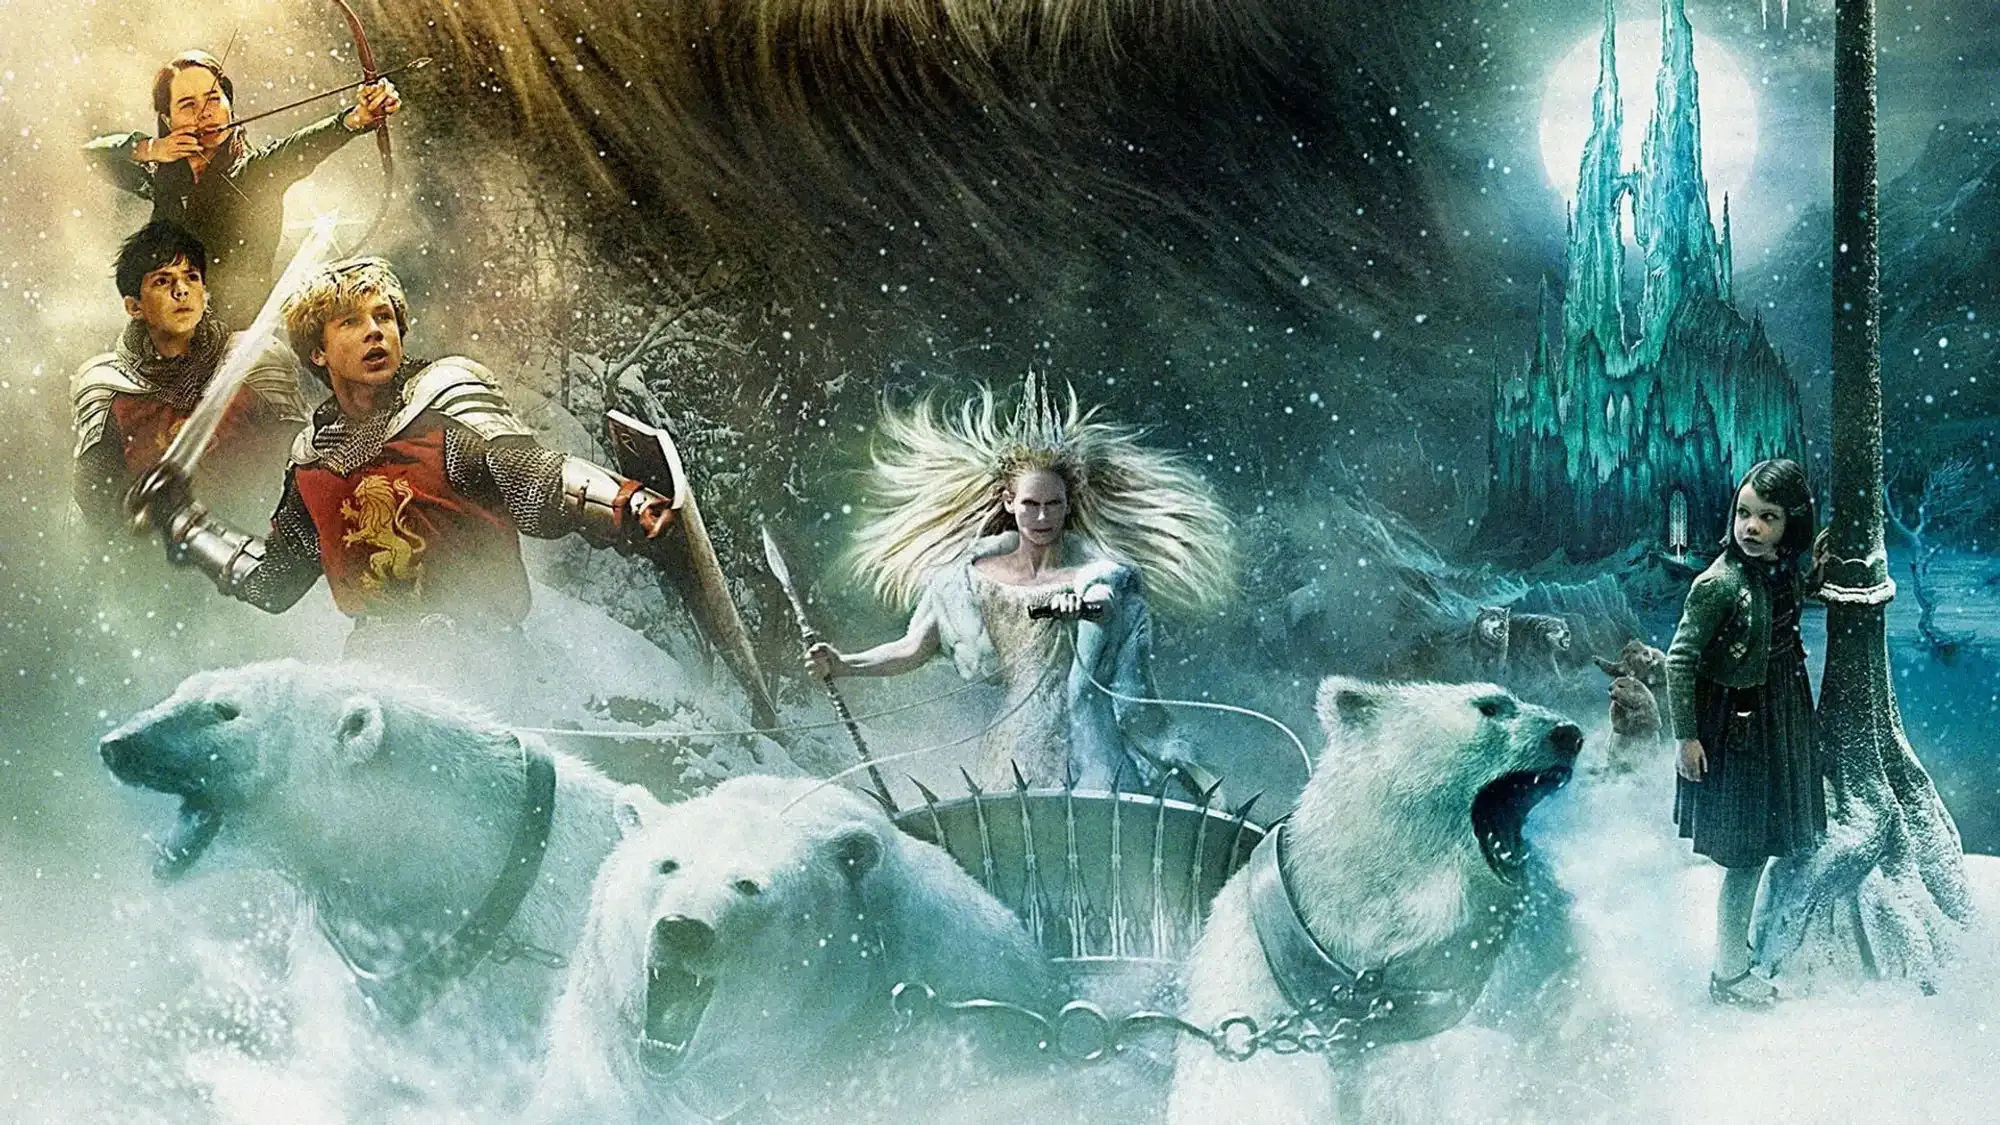 The Chronicles of Narnia: The Lion, the Witch and the Wardrobe movie review